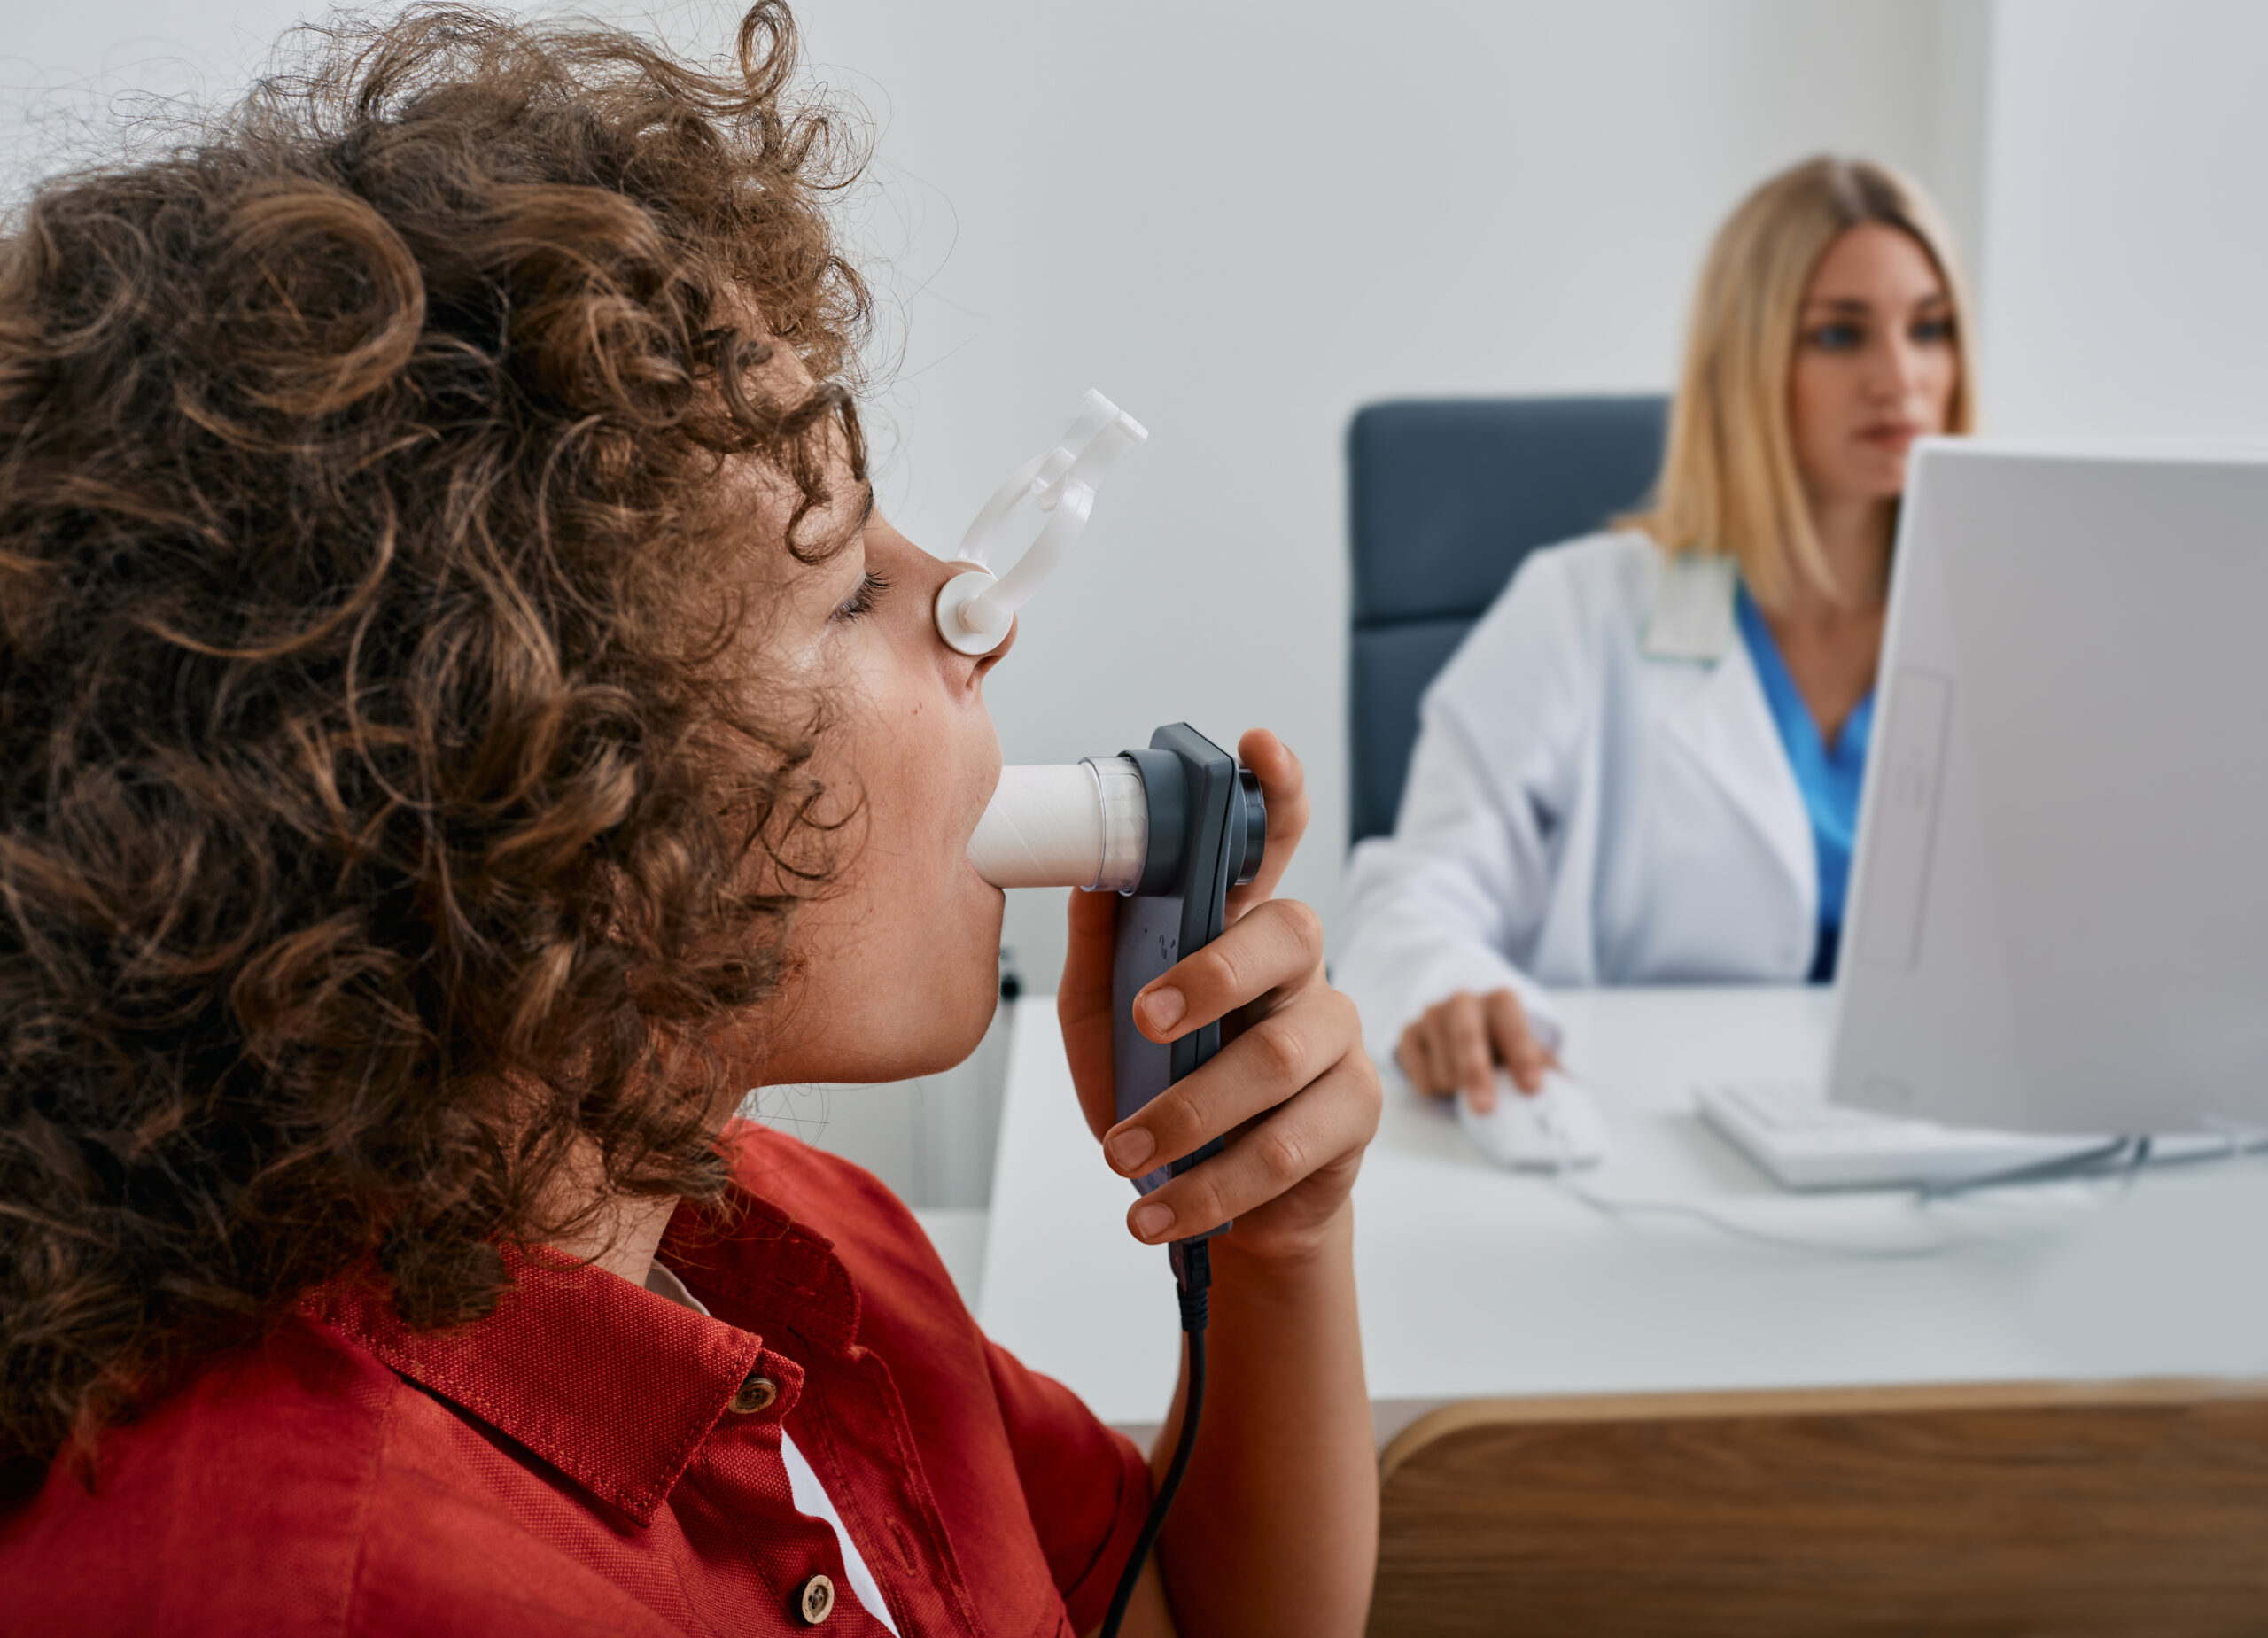 Male child during breathing spirometry and pulmonary function test using medical spirometer with doctor looking at test results on monitor